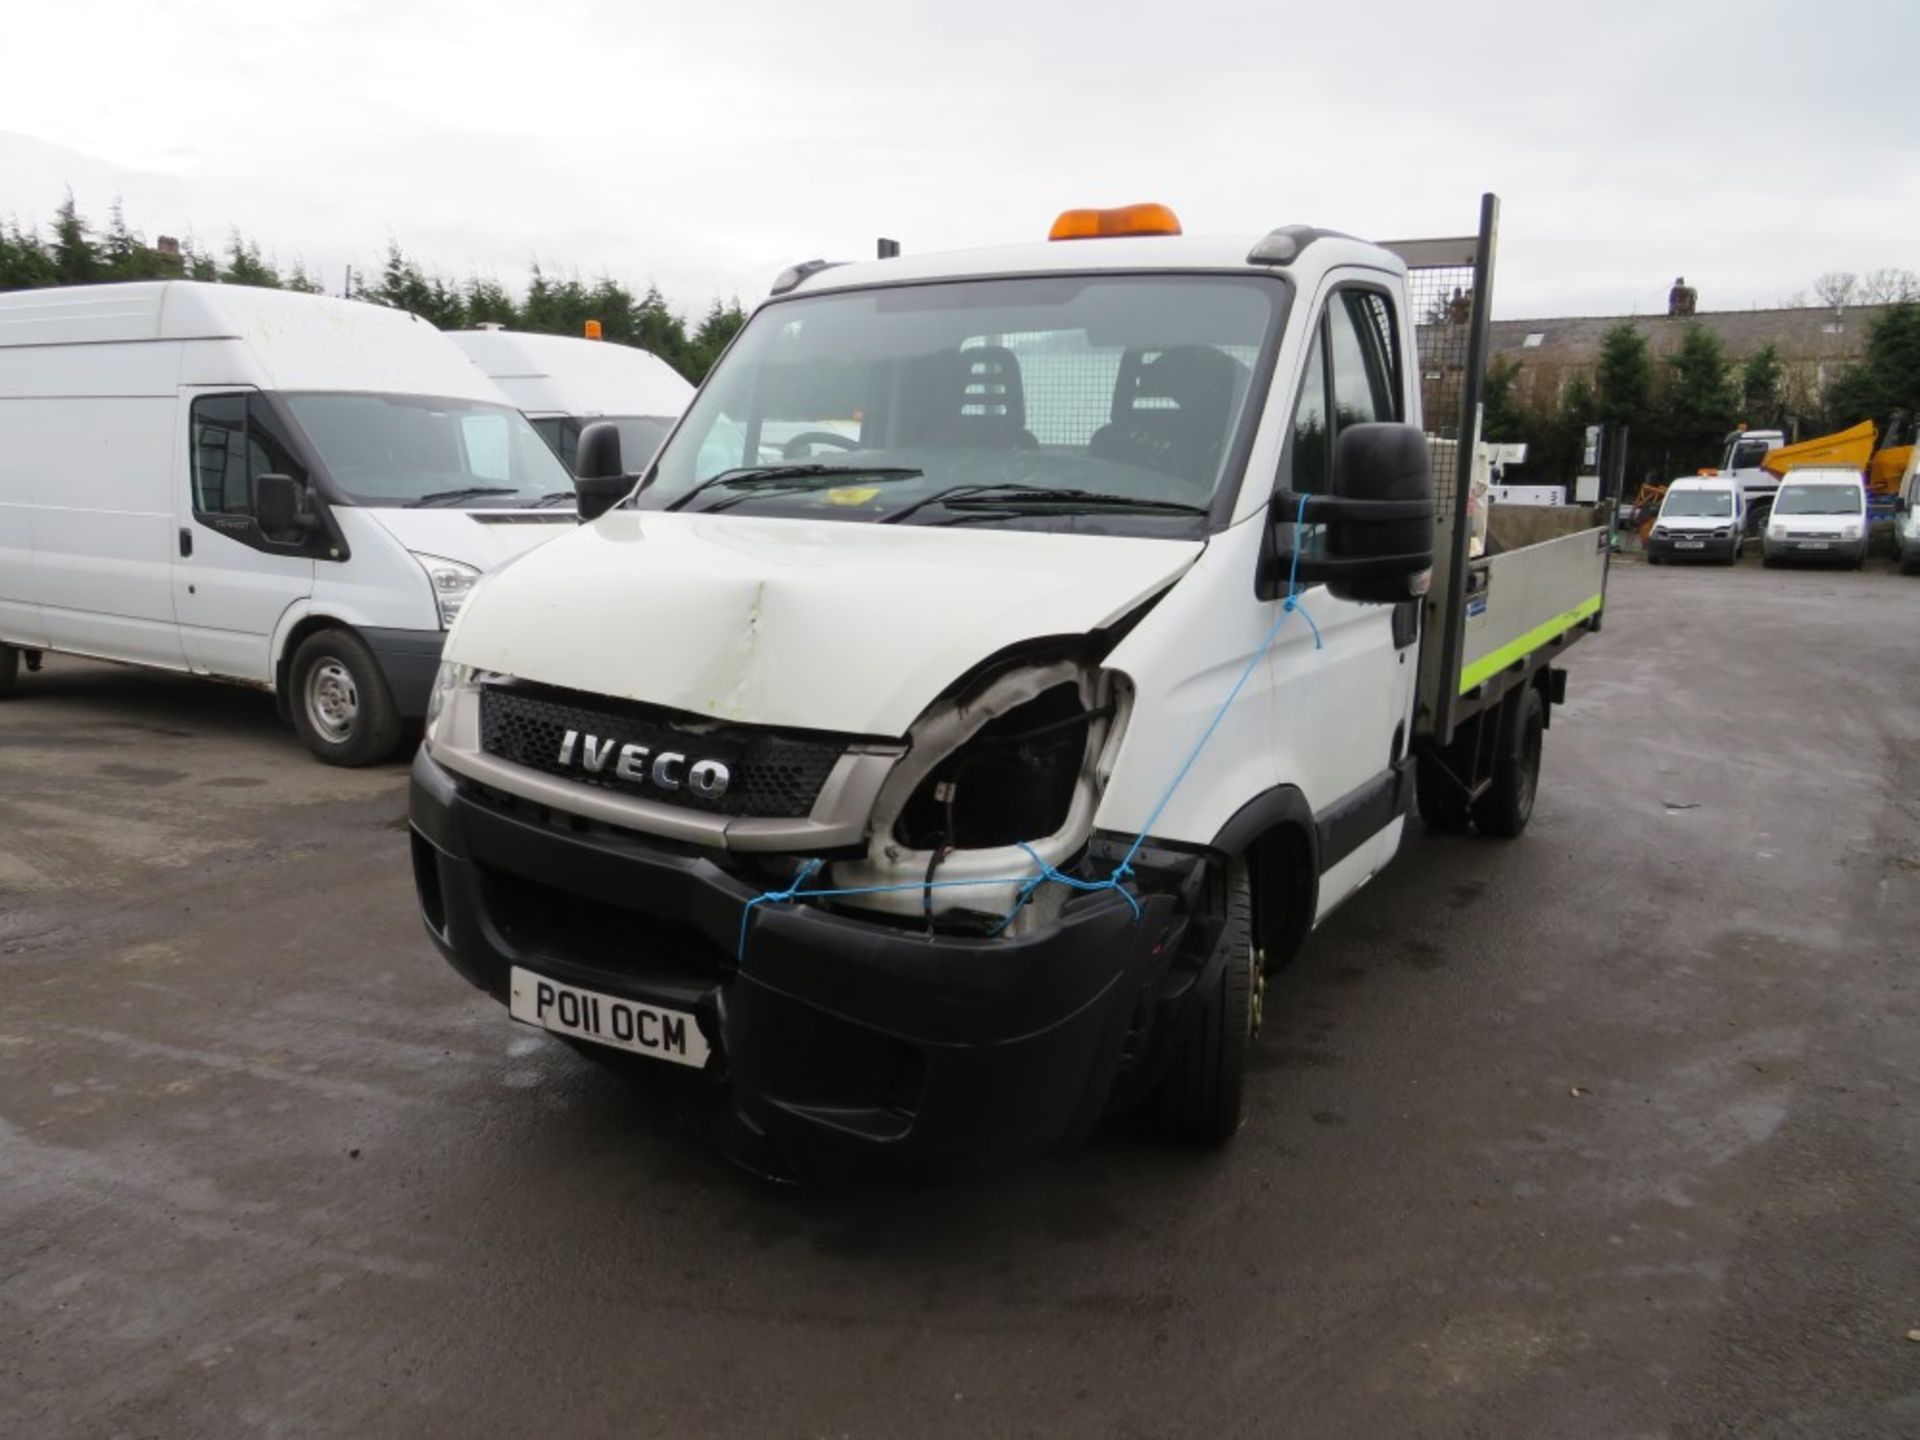 11 reg IVECO DAILY 35C15 MWB TIPPER (DIRECT COUNCIL) 1ST REG 08/11, TEST 08/20, 98123M, V5 HERE, 1 - Image 2 of 5